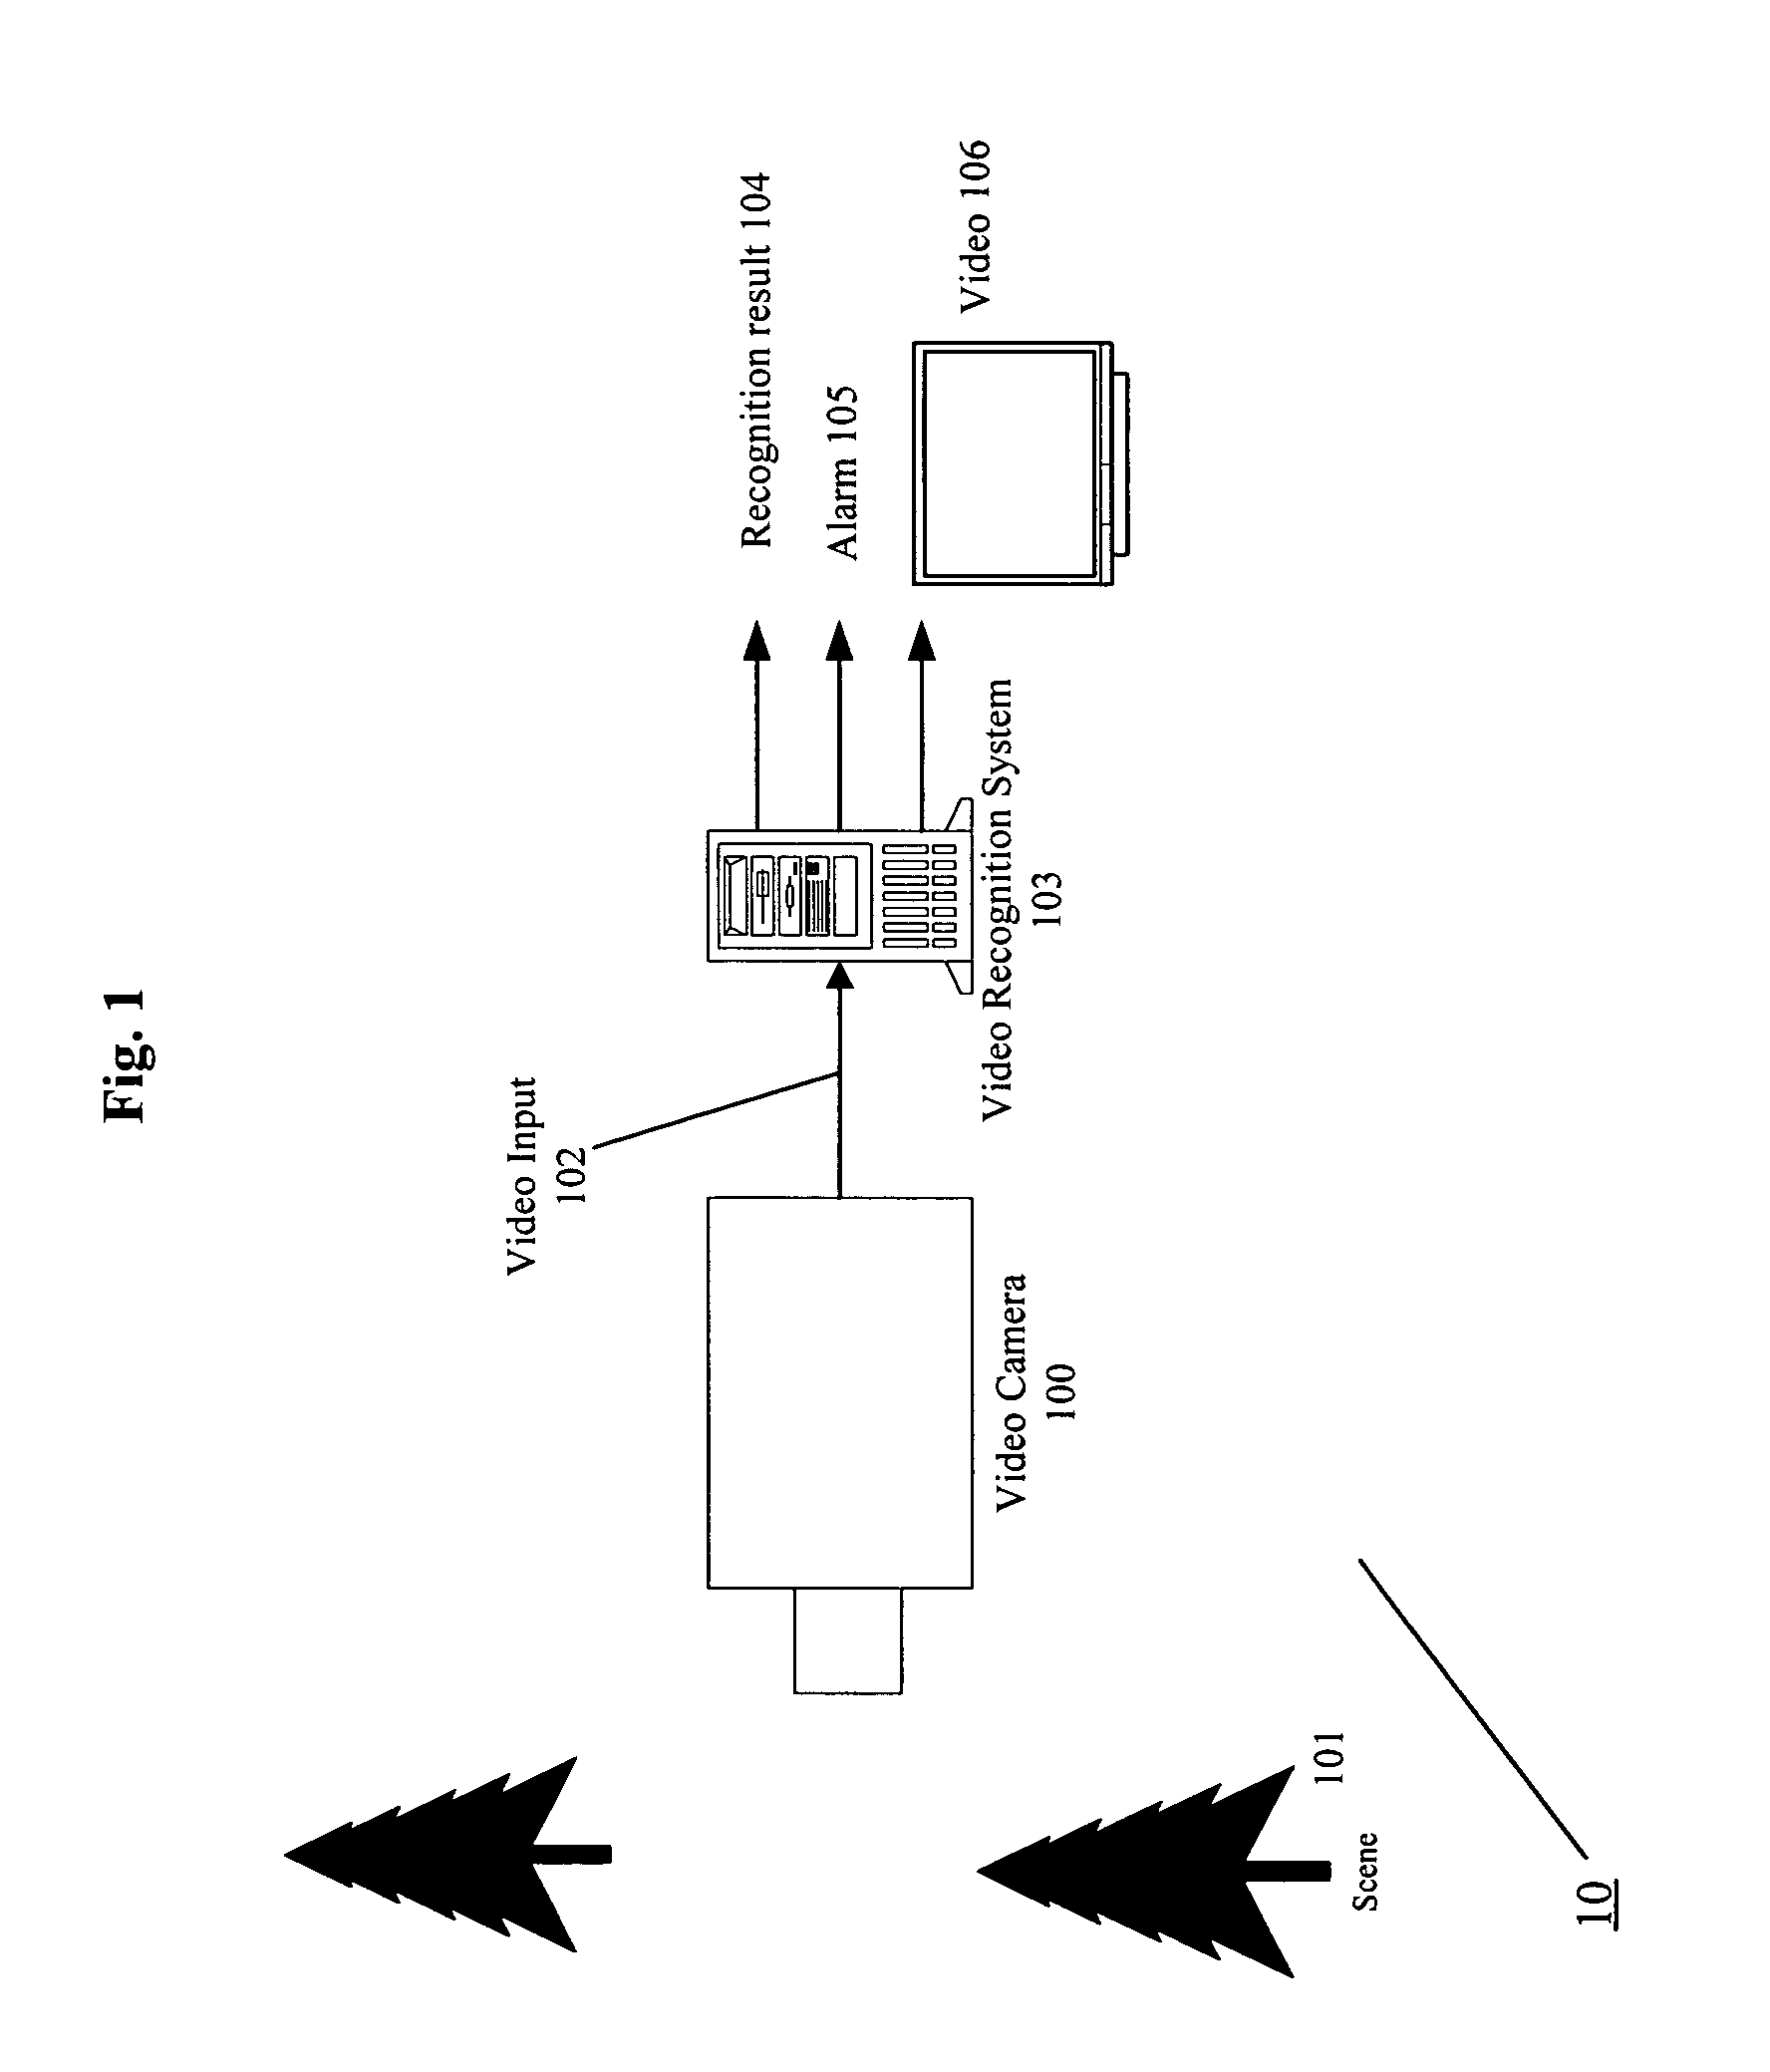 Method and system for flow detection and motion analysis